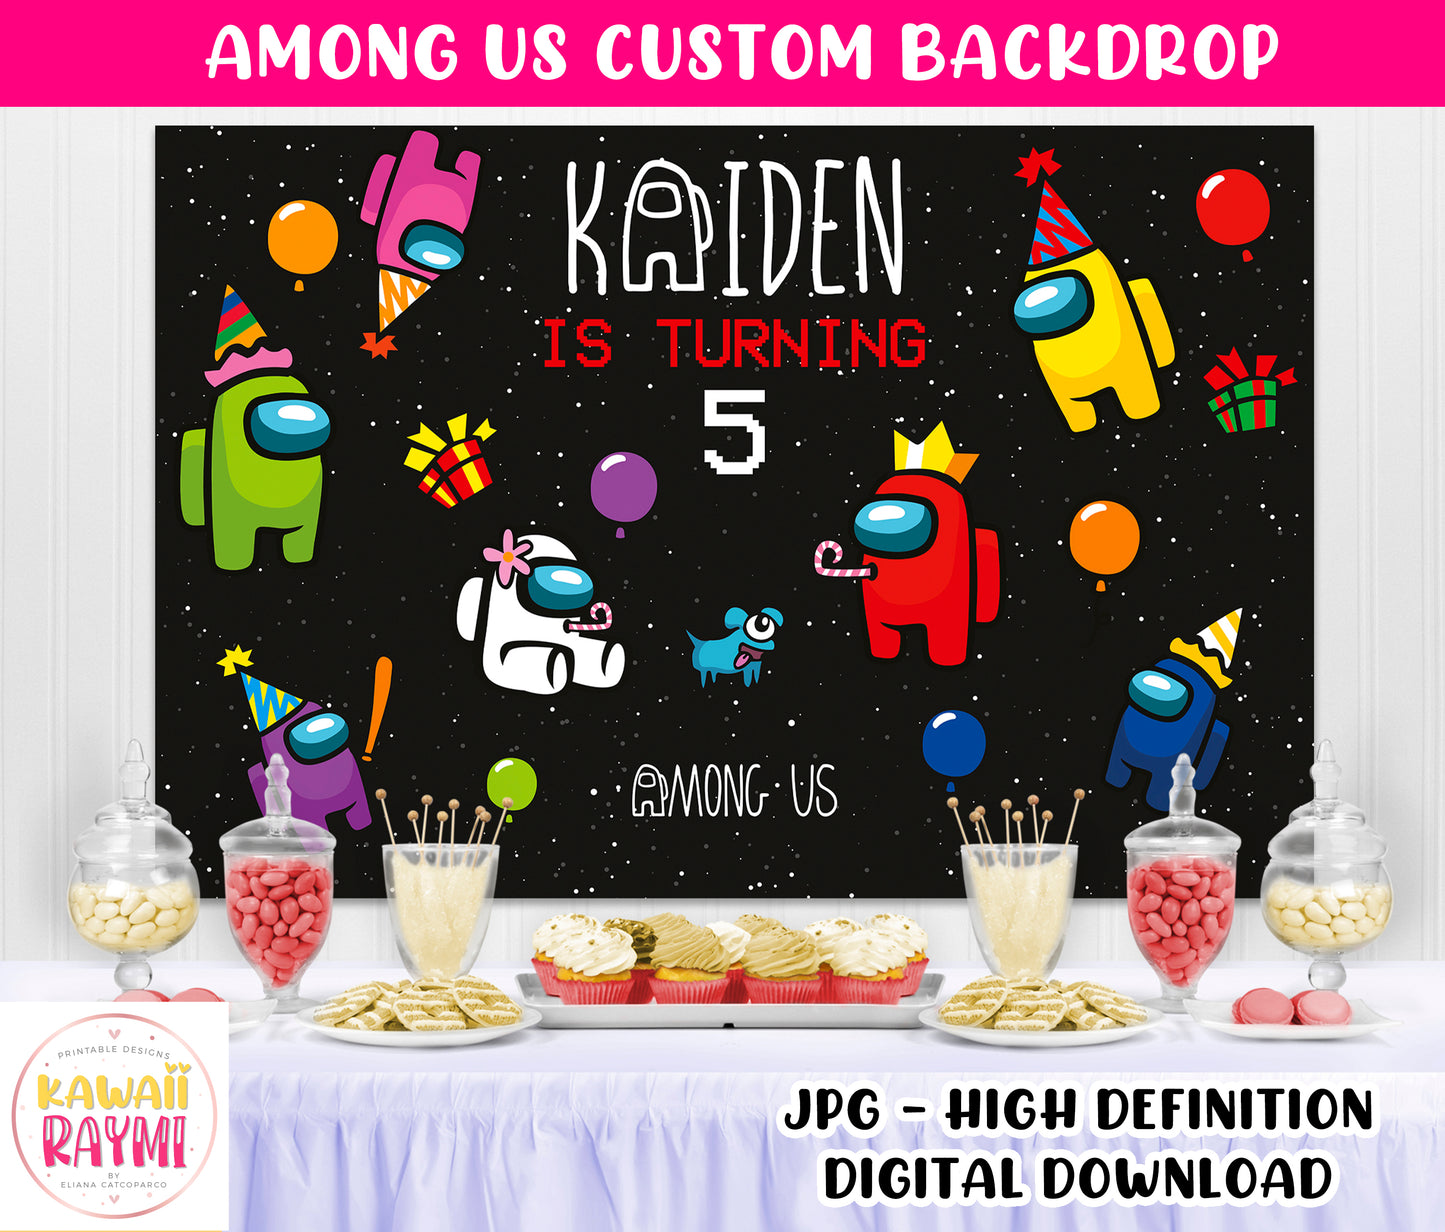 Among Us  Custom Backdrop for Birthday Party